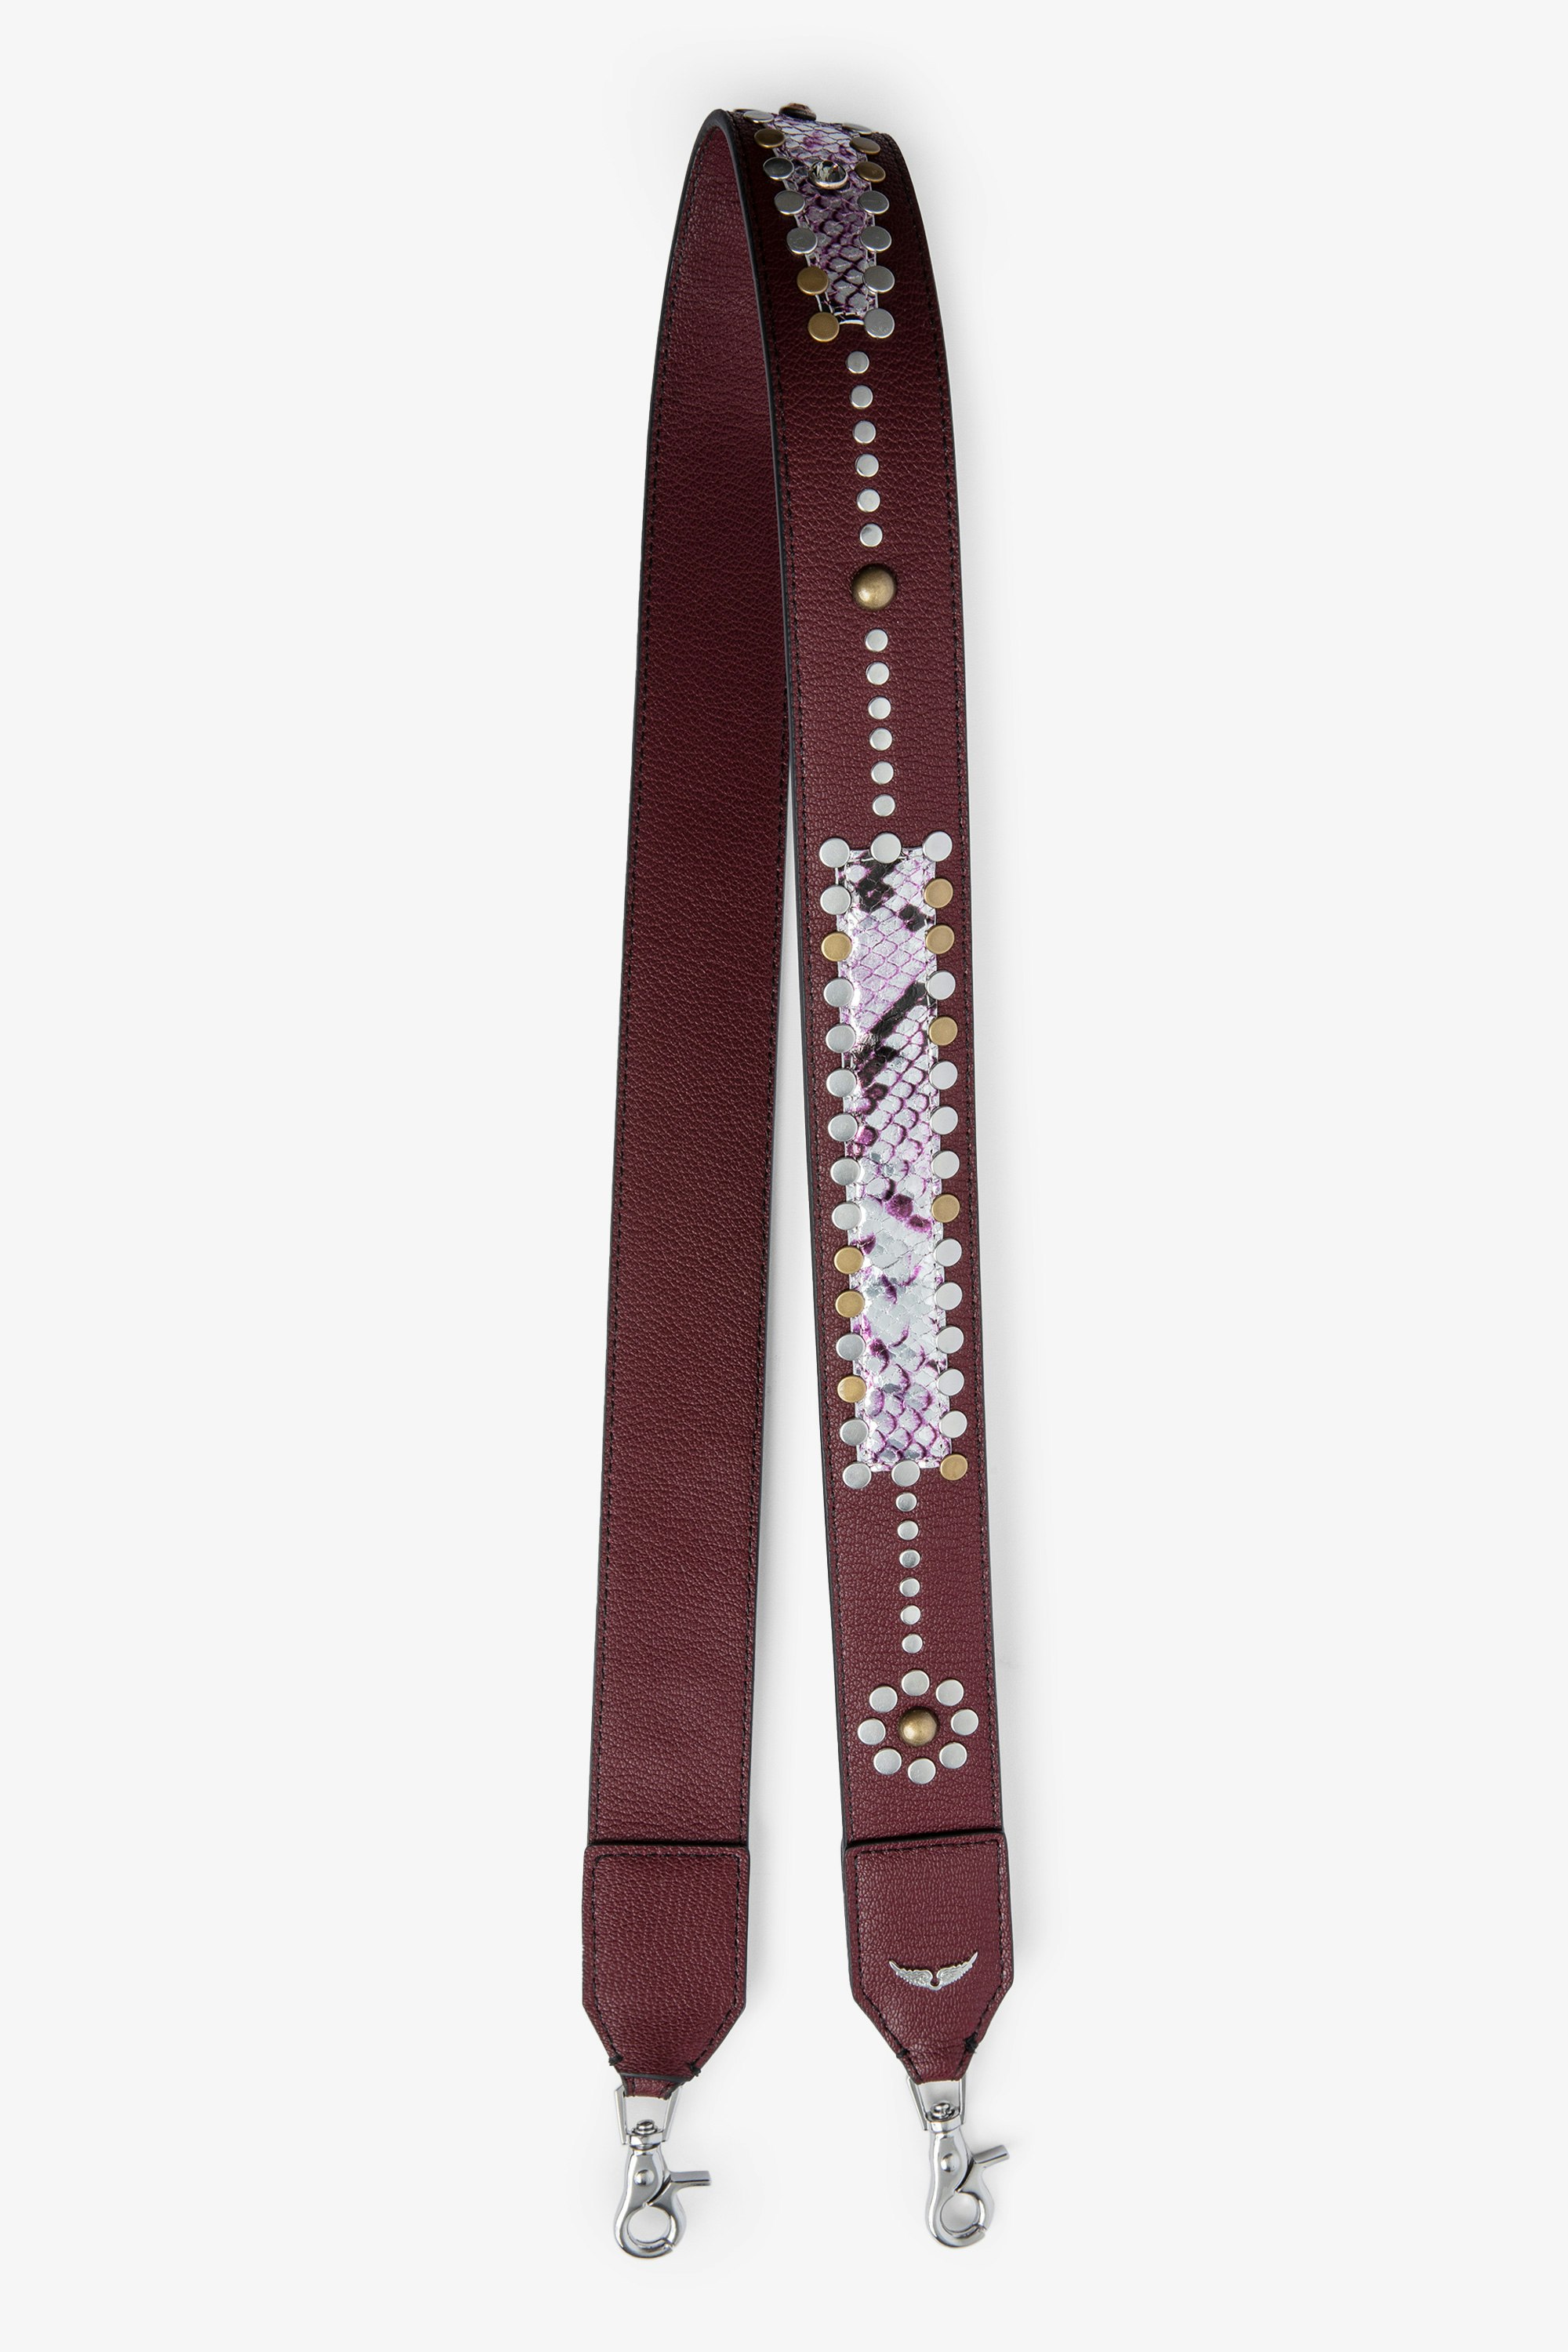 Wild ストラップ Women’s leather shoulder strap with rivets and python-embossed panels